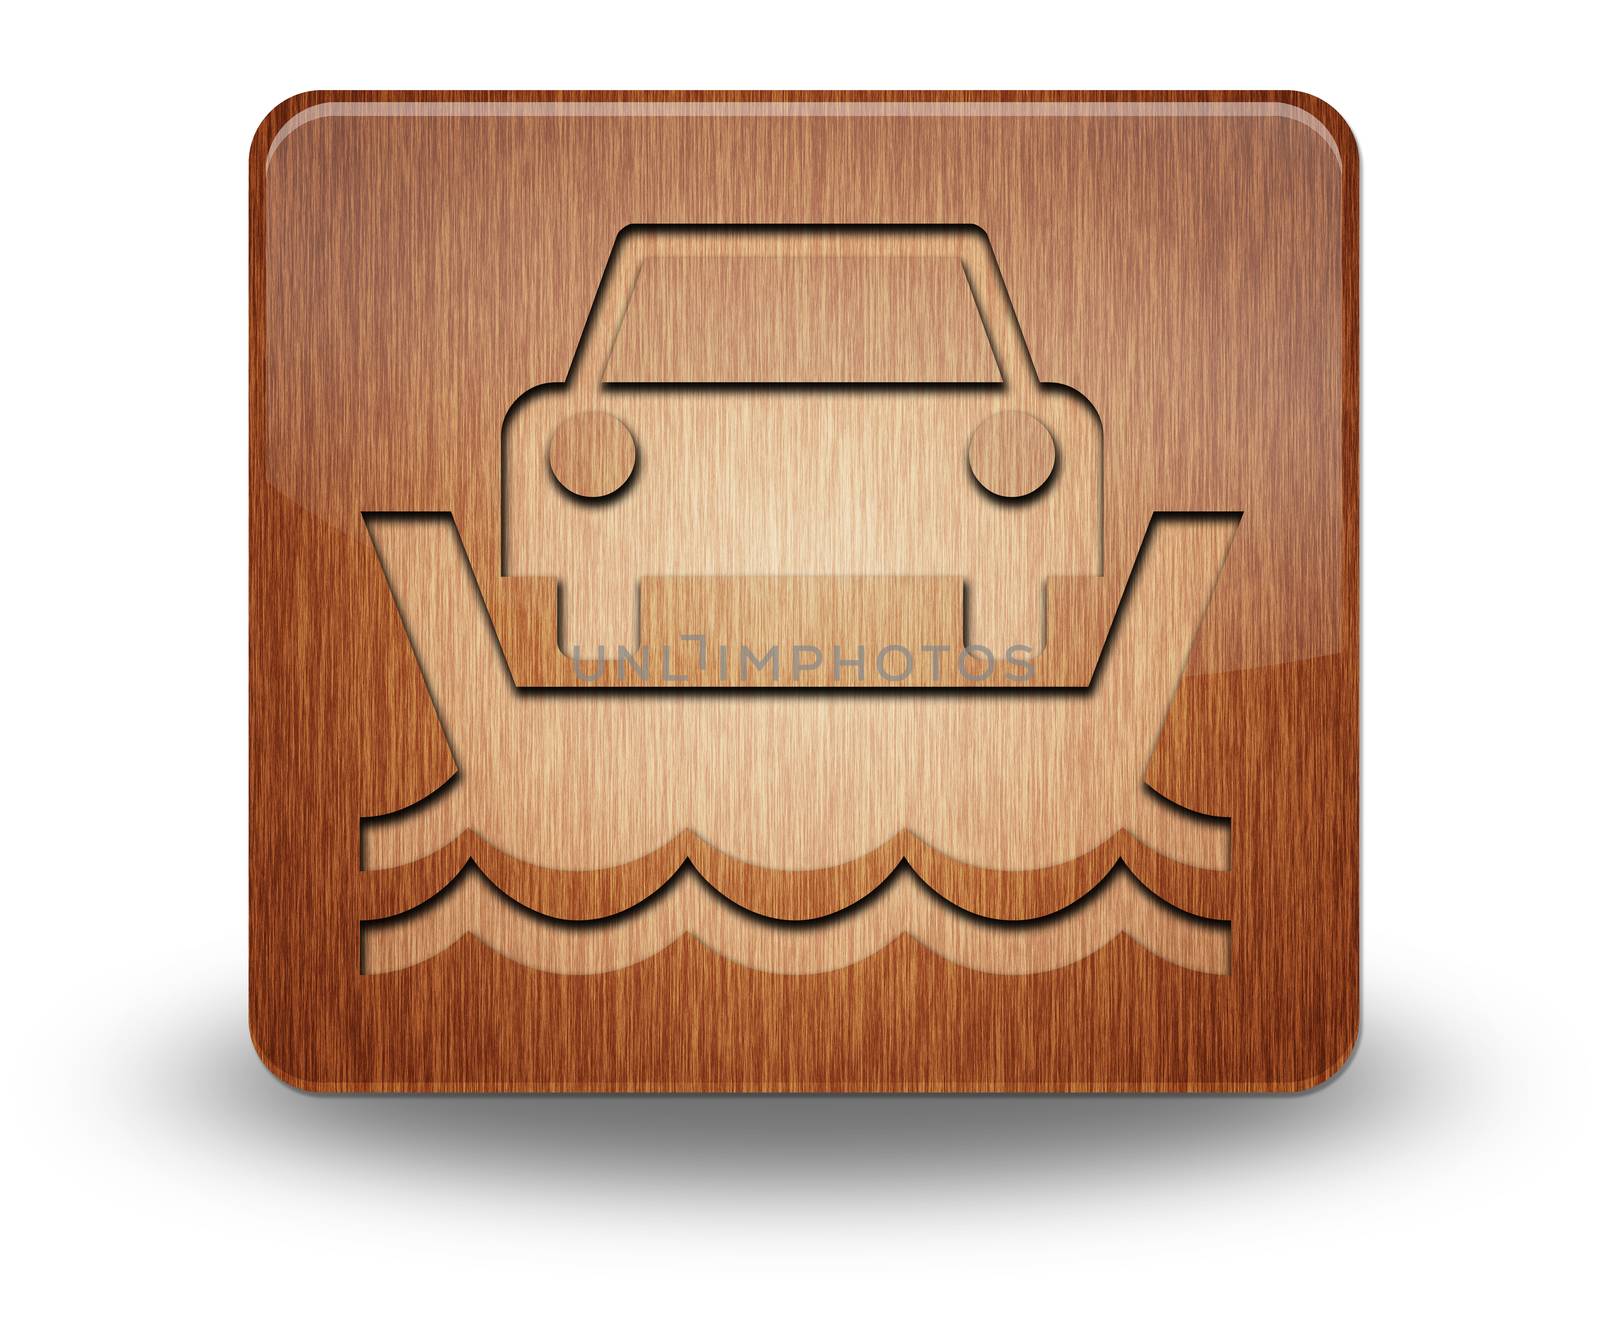 Icon, Button, Pictogram with Vehicle Ferry symbol